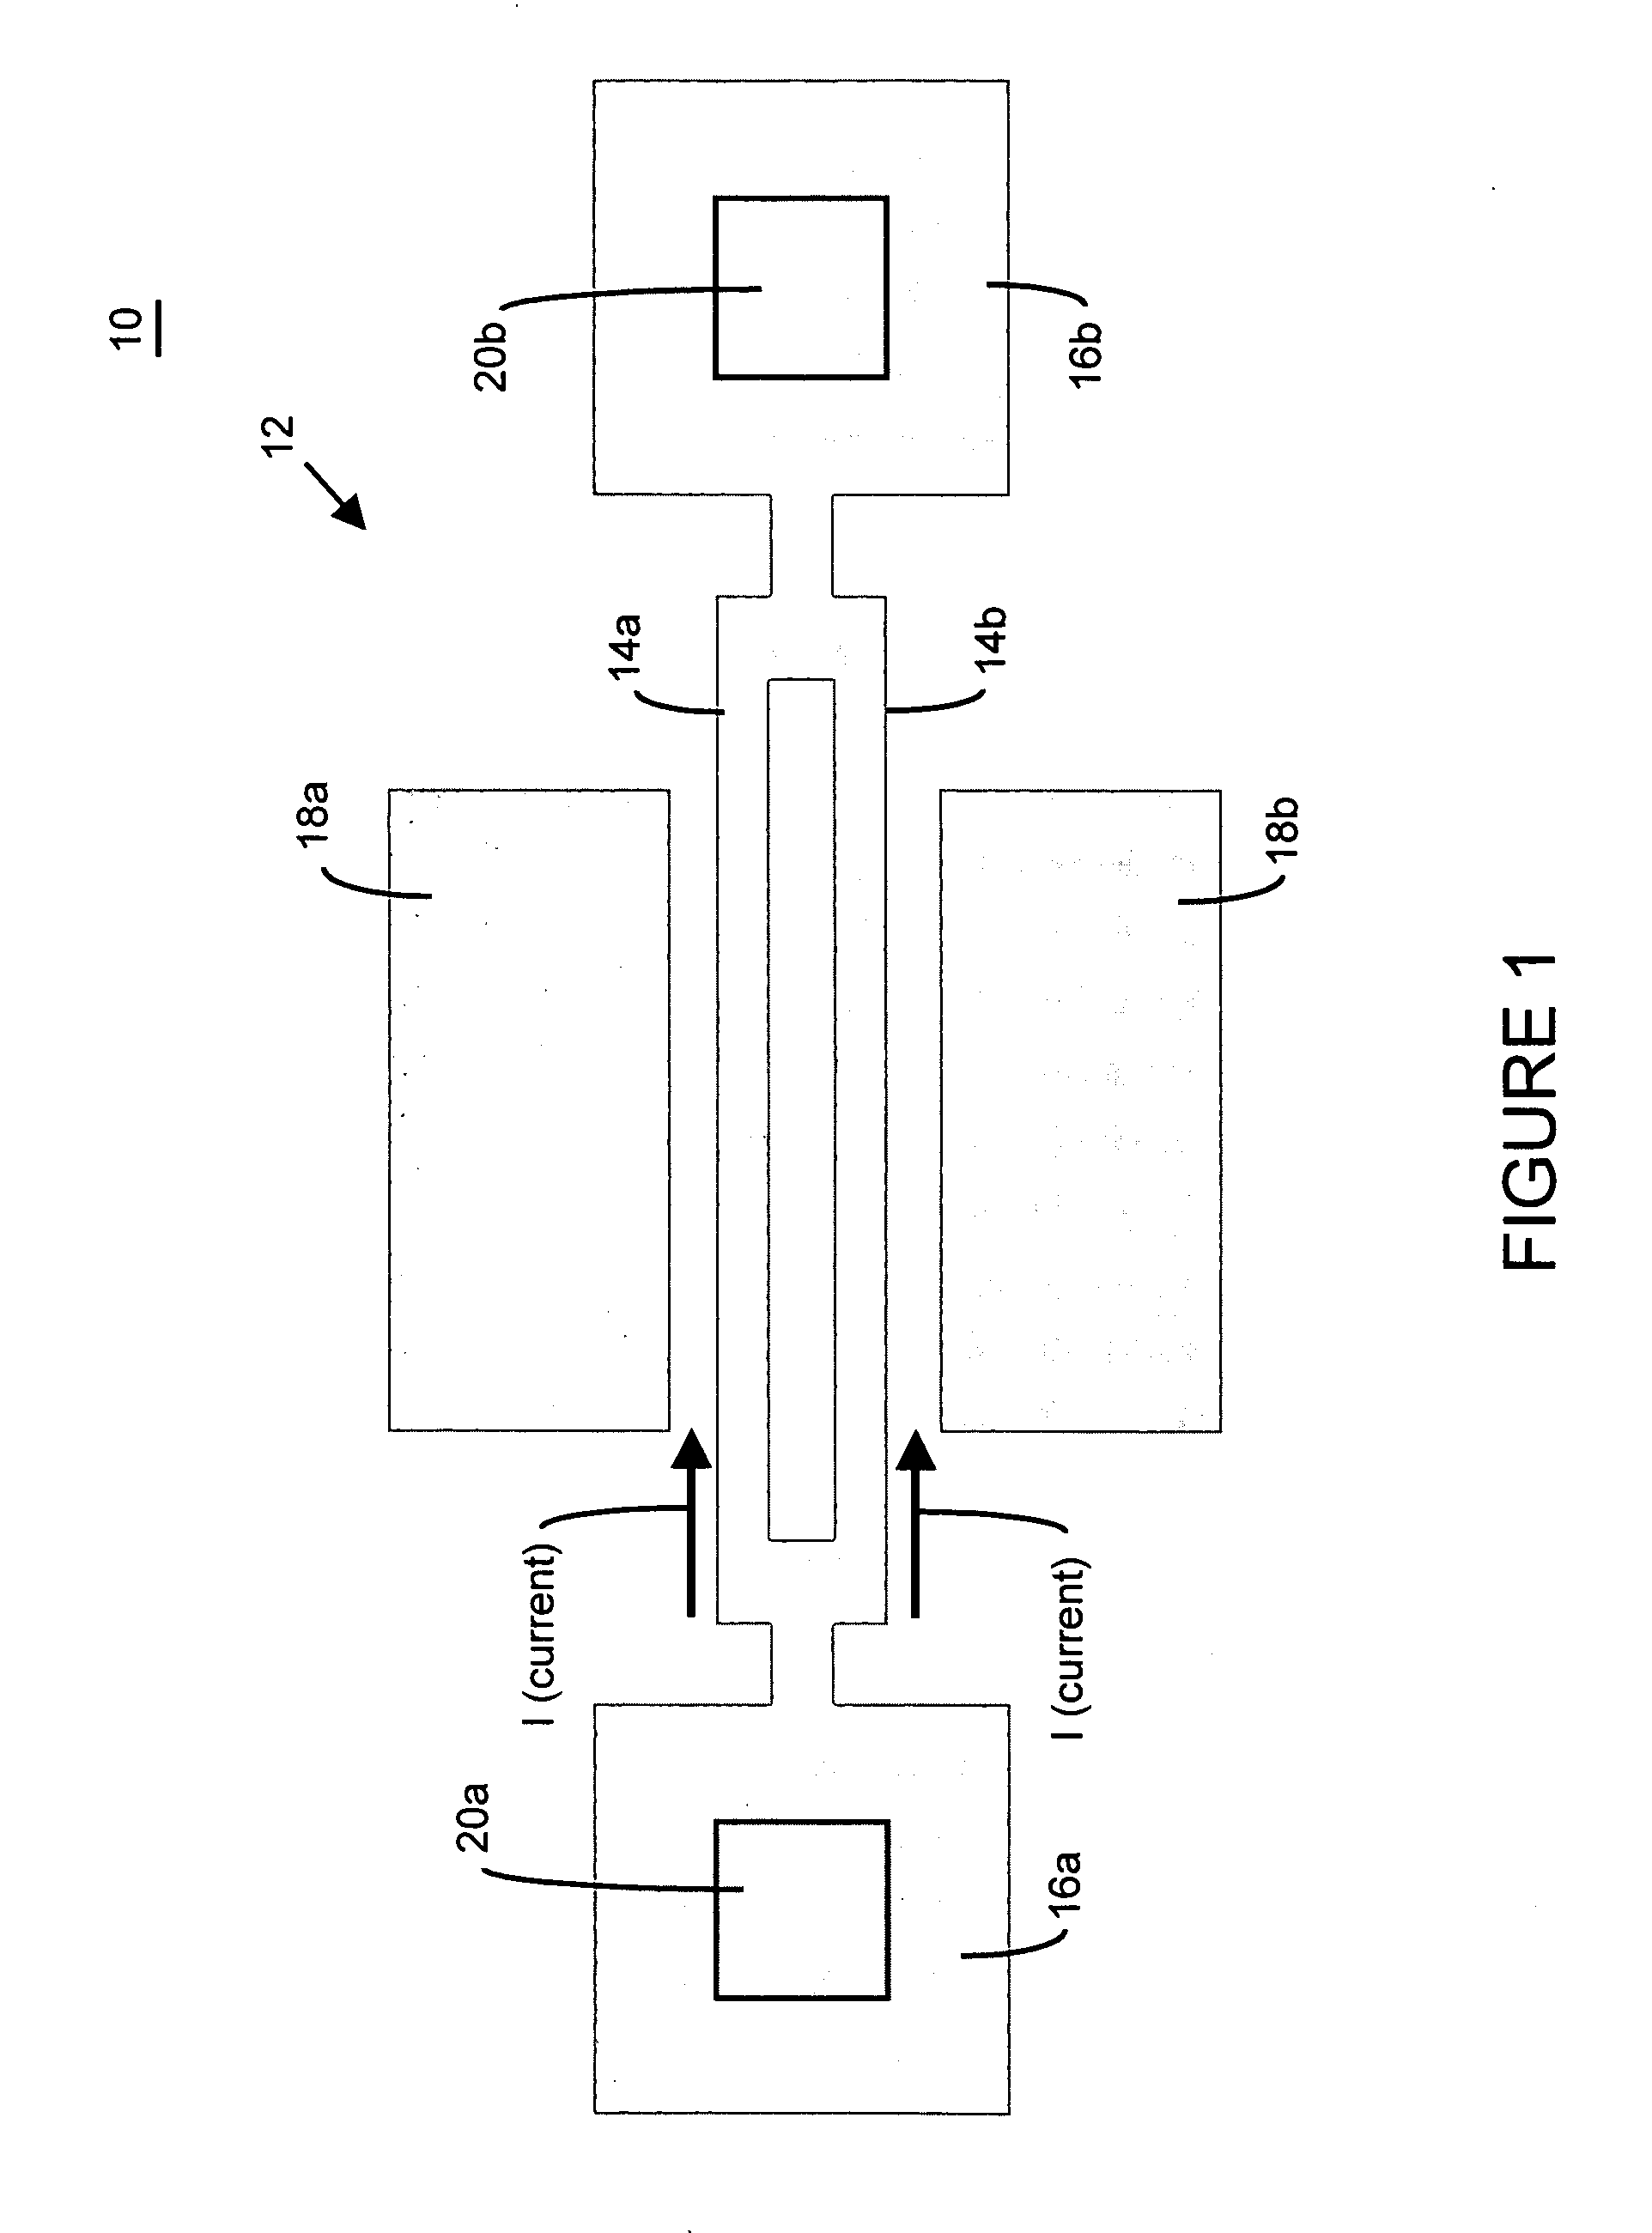 Method for adjusting the frequency of a MEMS resonator